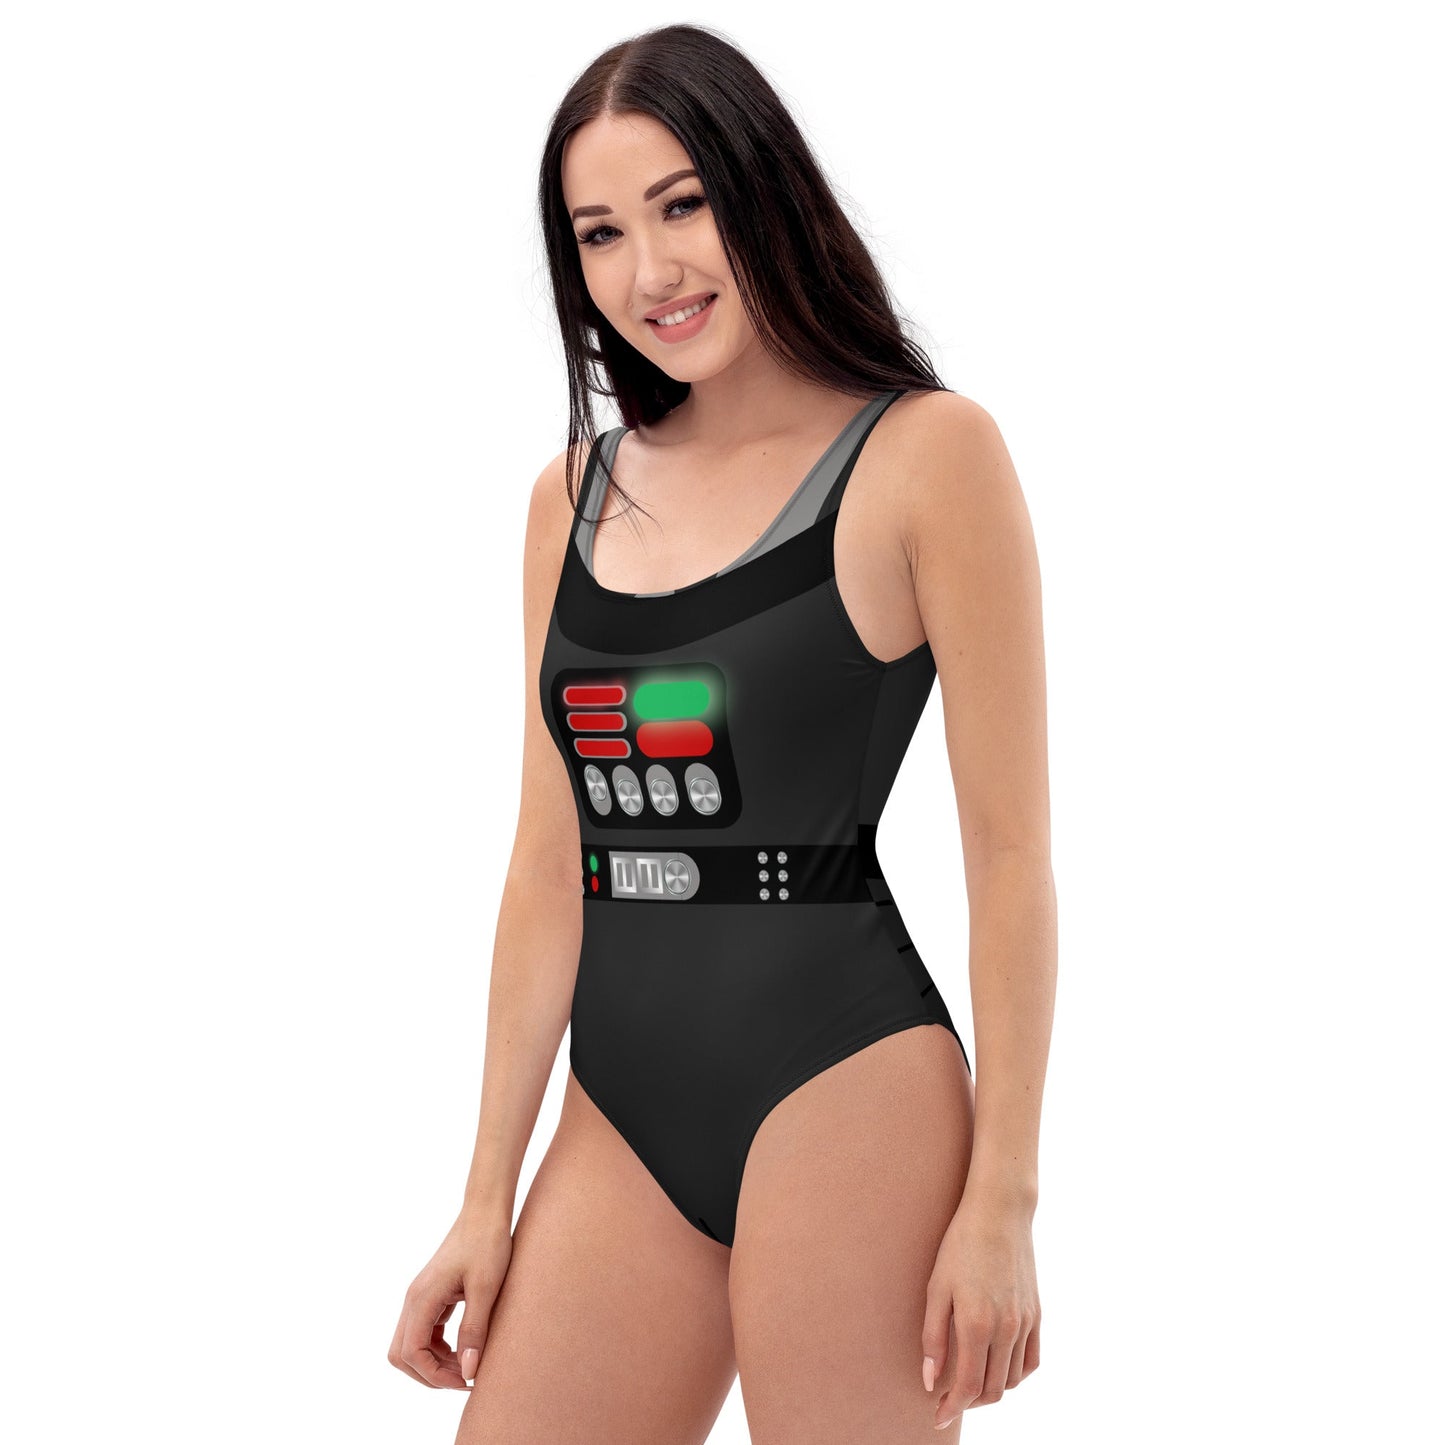 Dark side One-Piece Swimsuit Darth vaderdisney cruiseWrong Lever Clothing